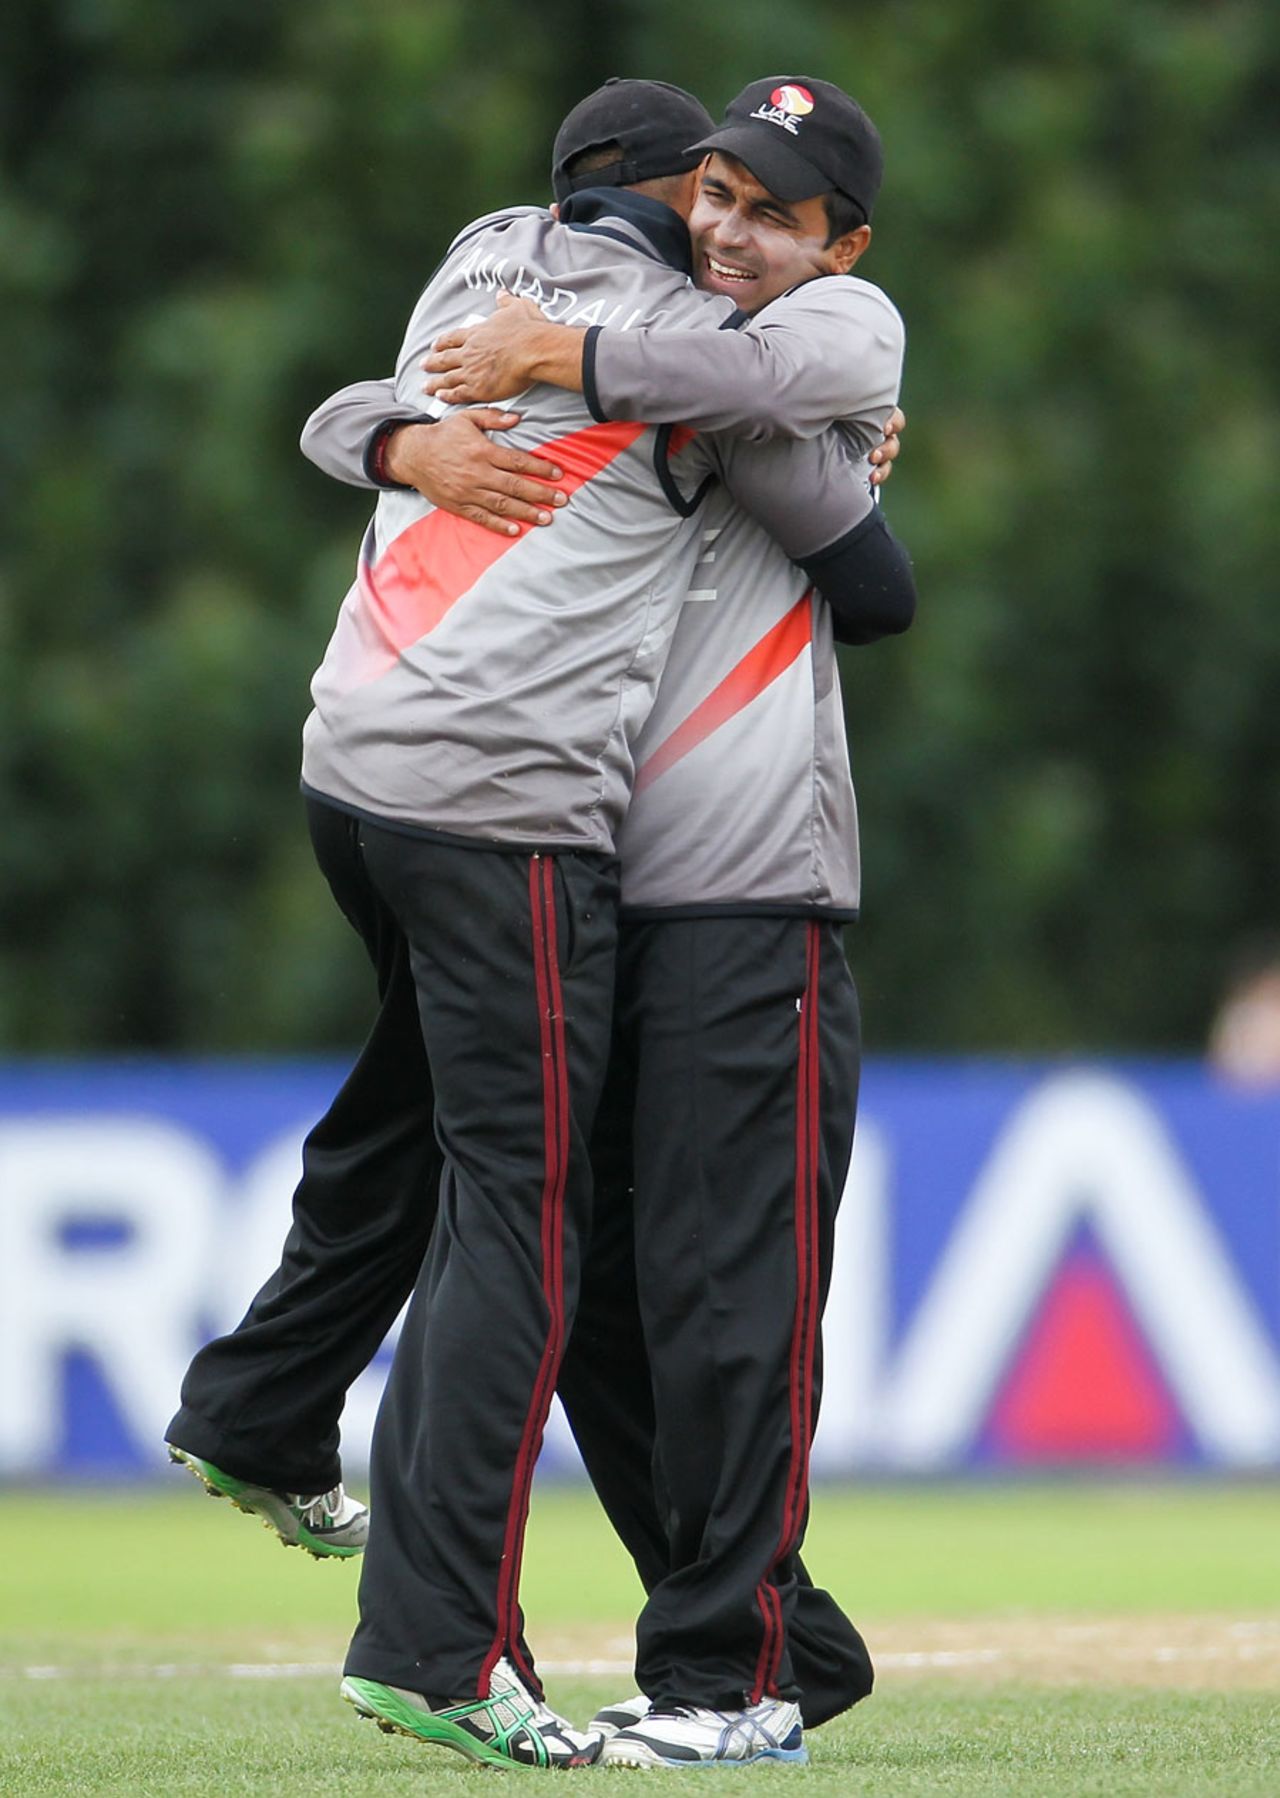 Amjad Ali is hugged by his captain Khurram Khan after taking a catch, Cricket World Cup Qualifier, final, Lincoln, February 1, 2014